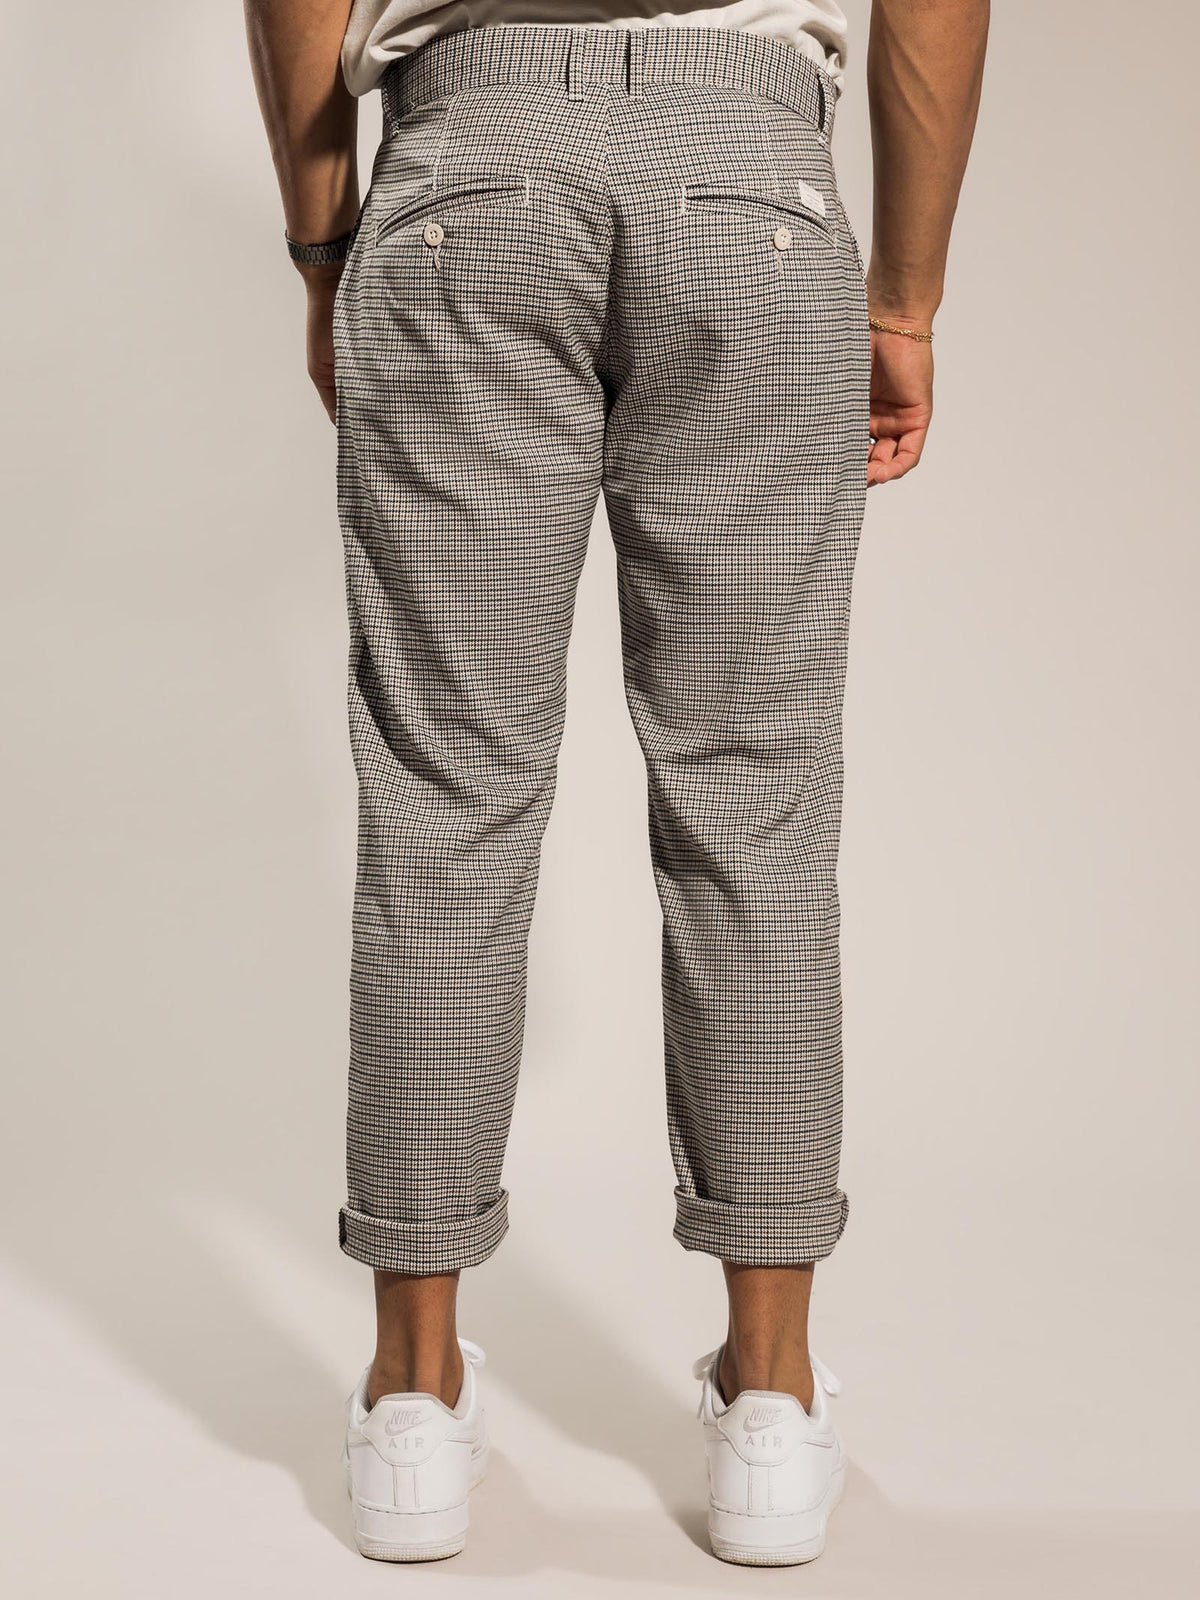 Maison Pant in Stone Houndstooth